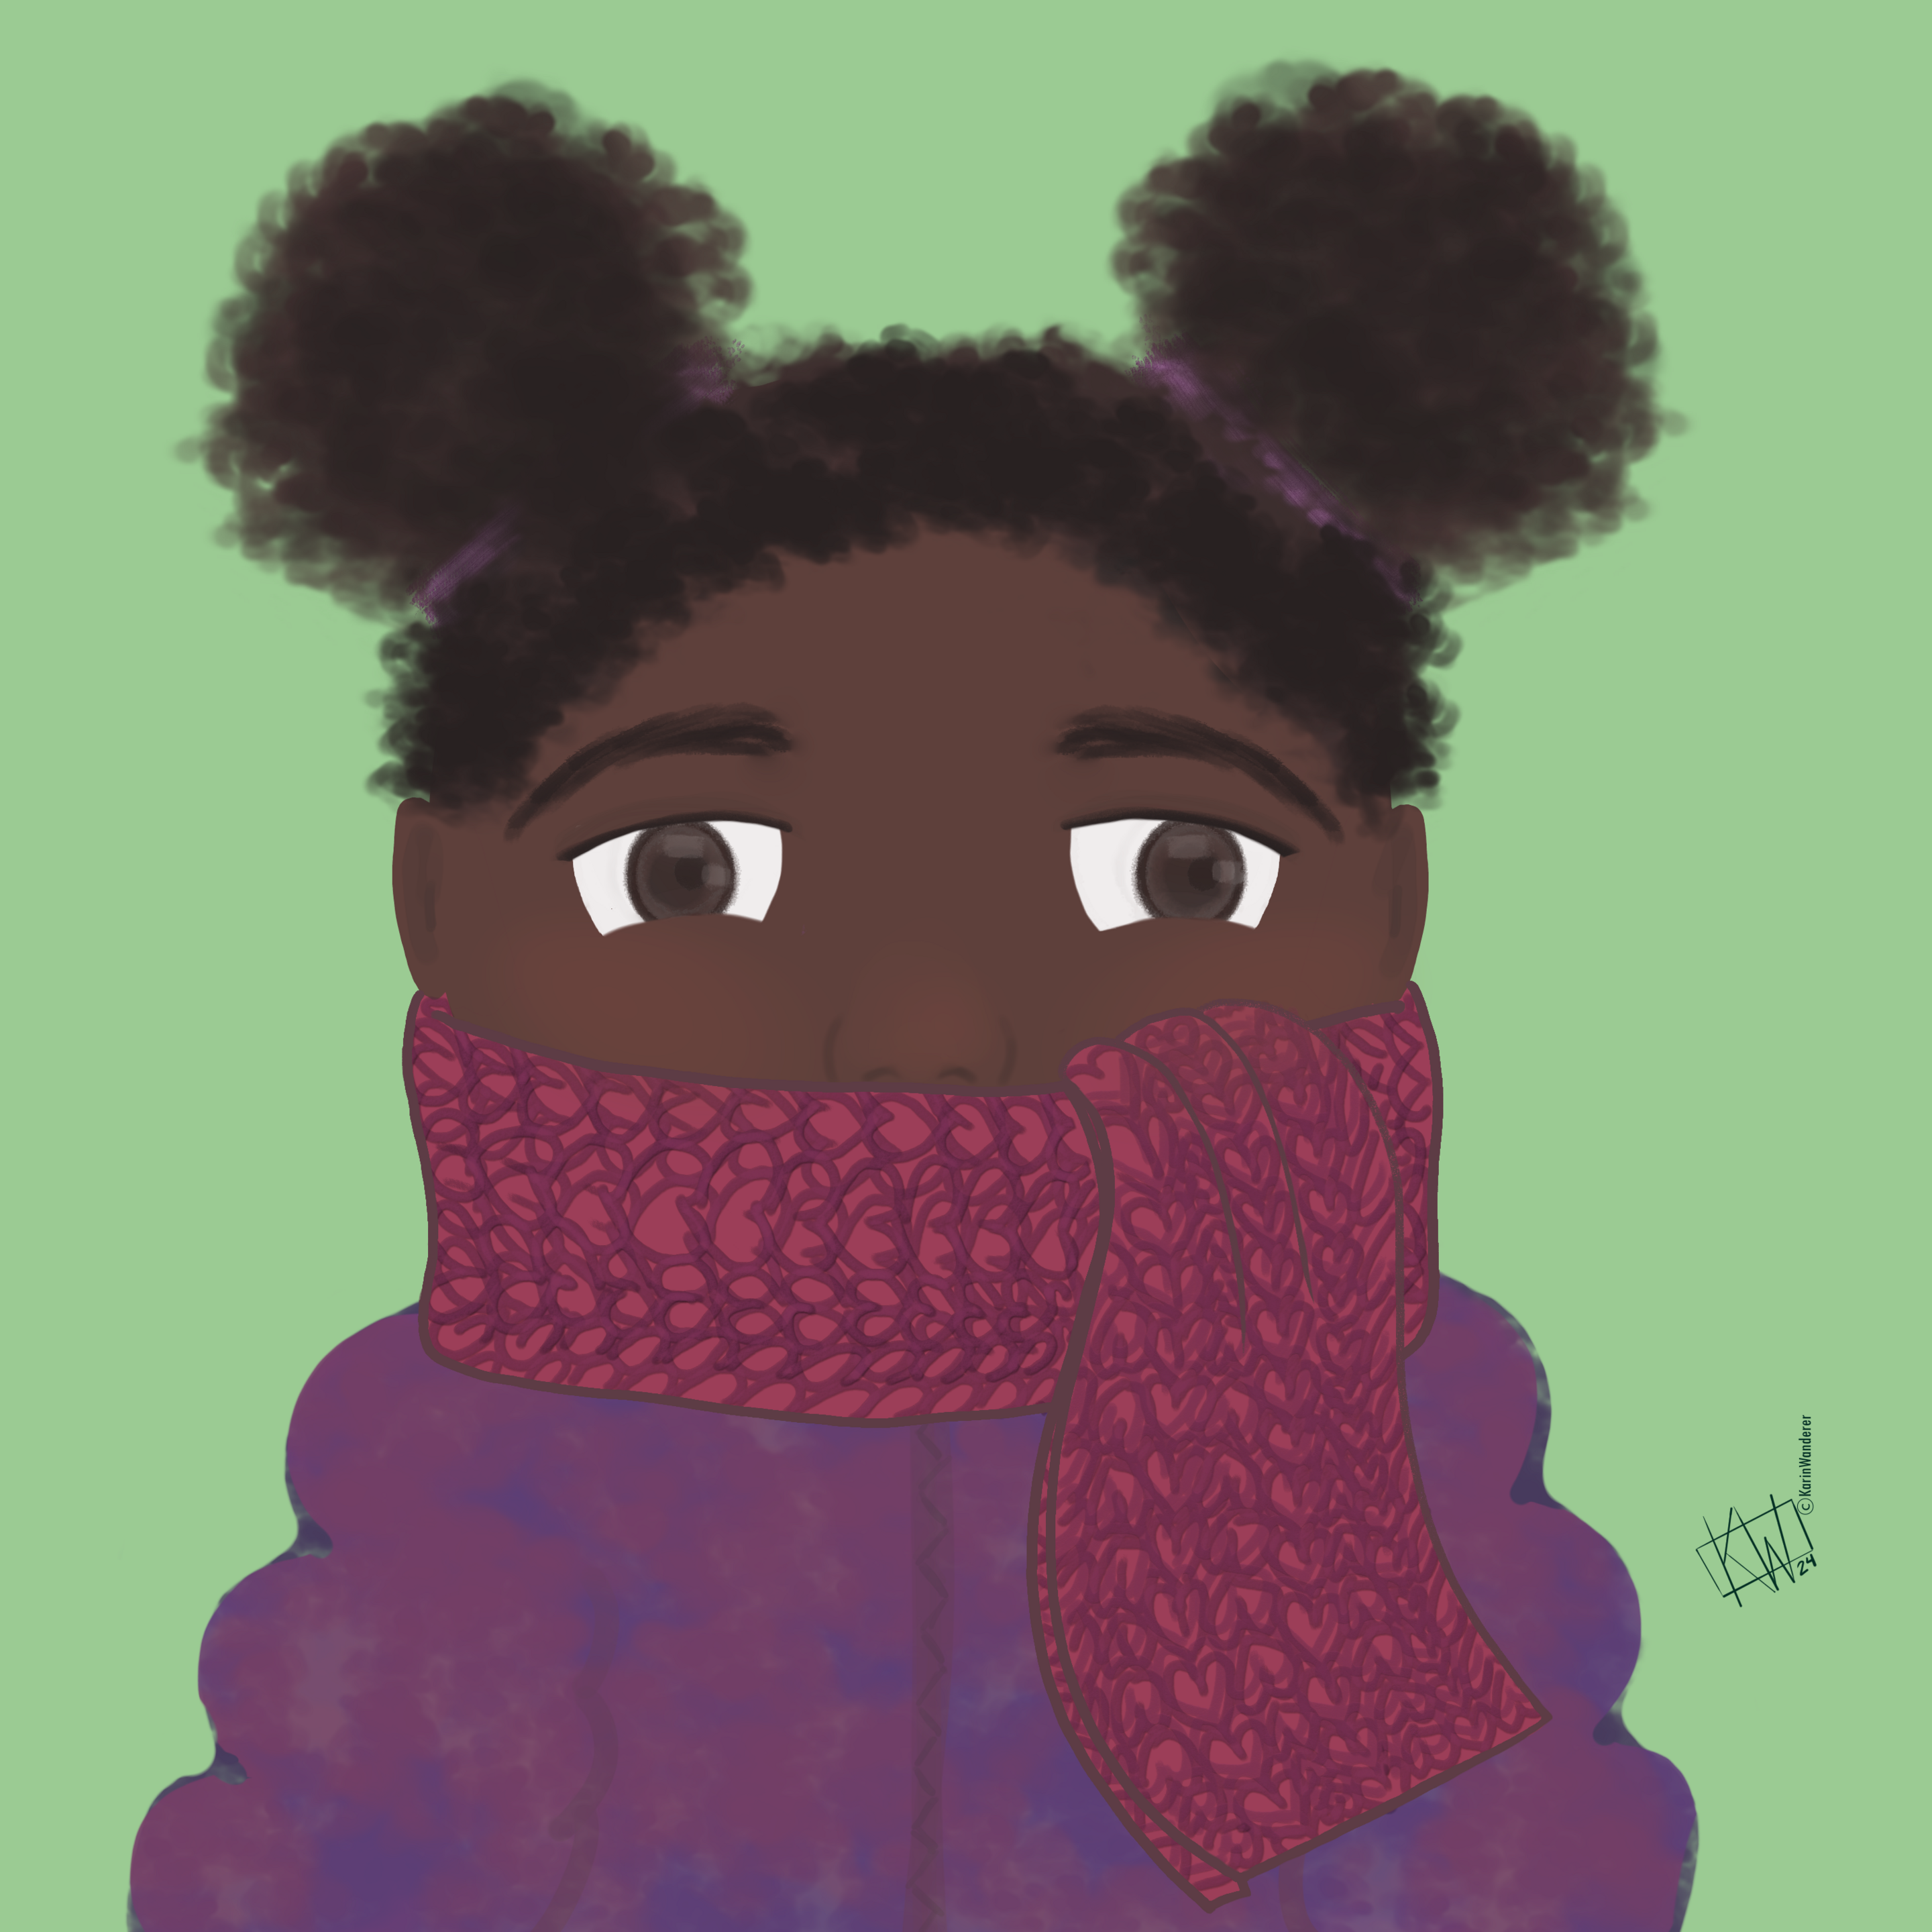 A small child with hair up in twin buns looks just past the viewer. She is bundled up in a pink scarf & a purple puffy jacket.